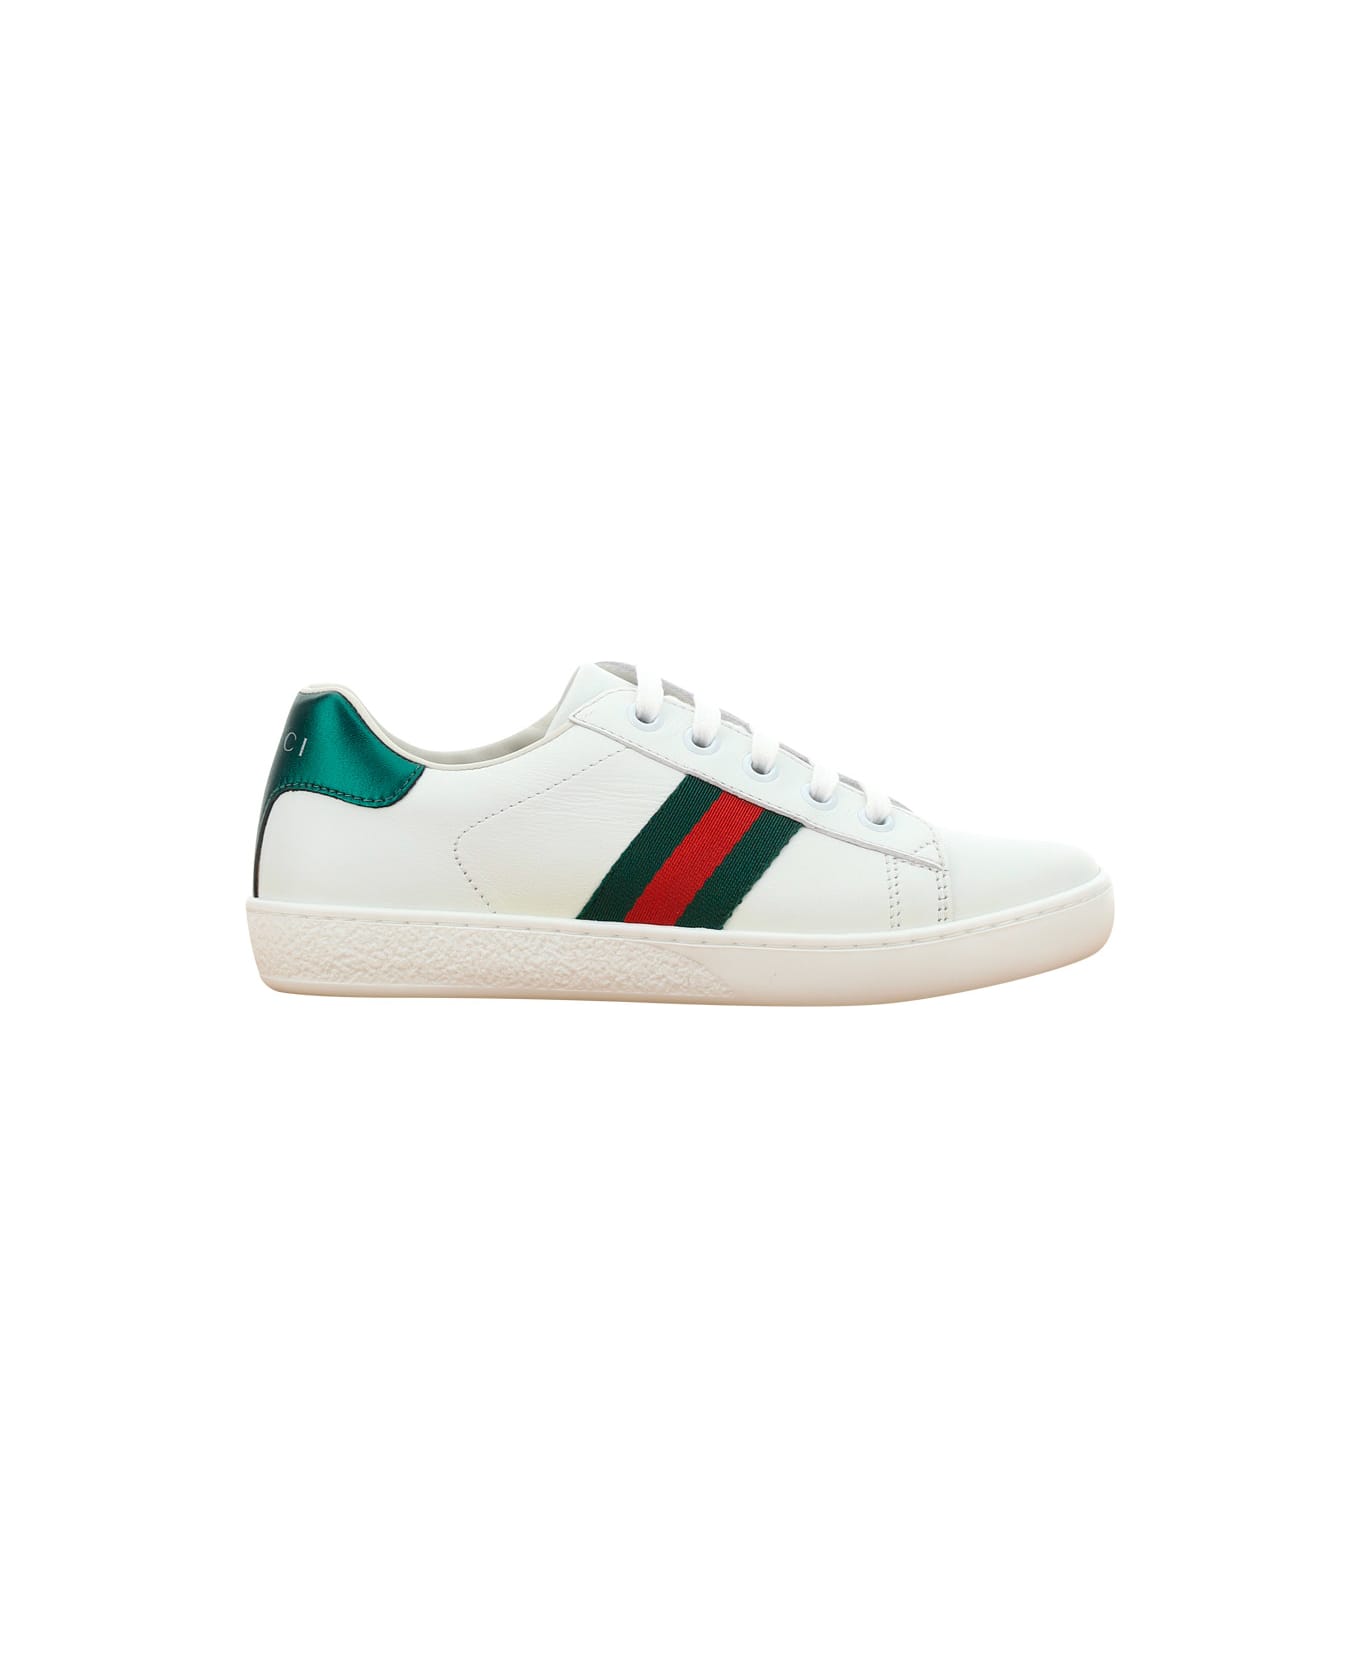 Gucci Ace Sneakers For Boy - White